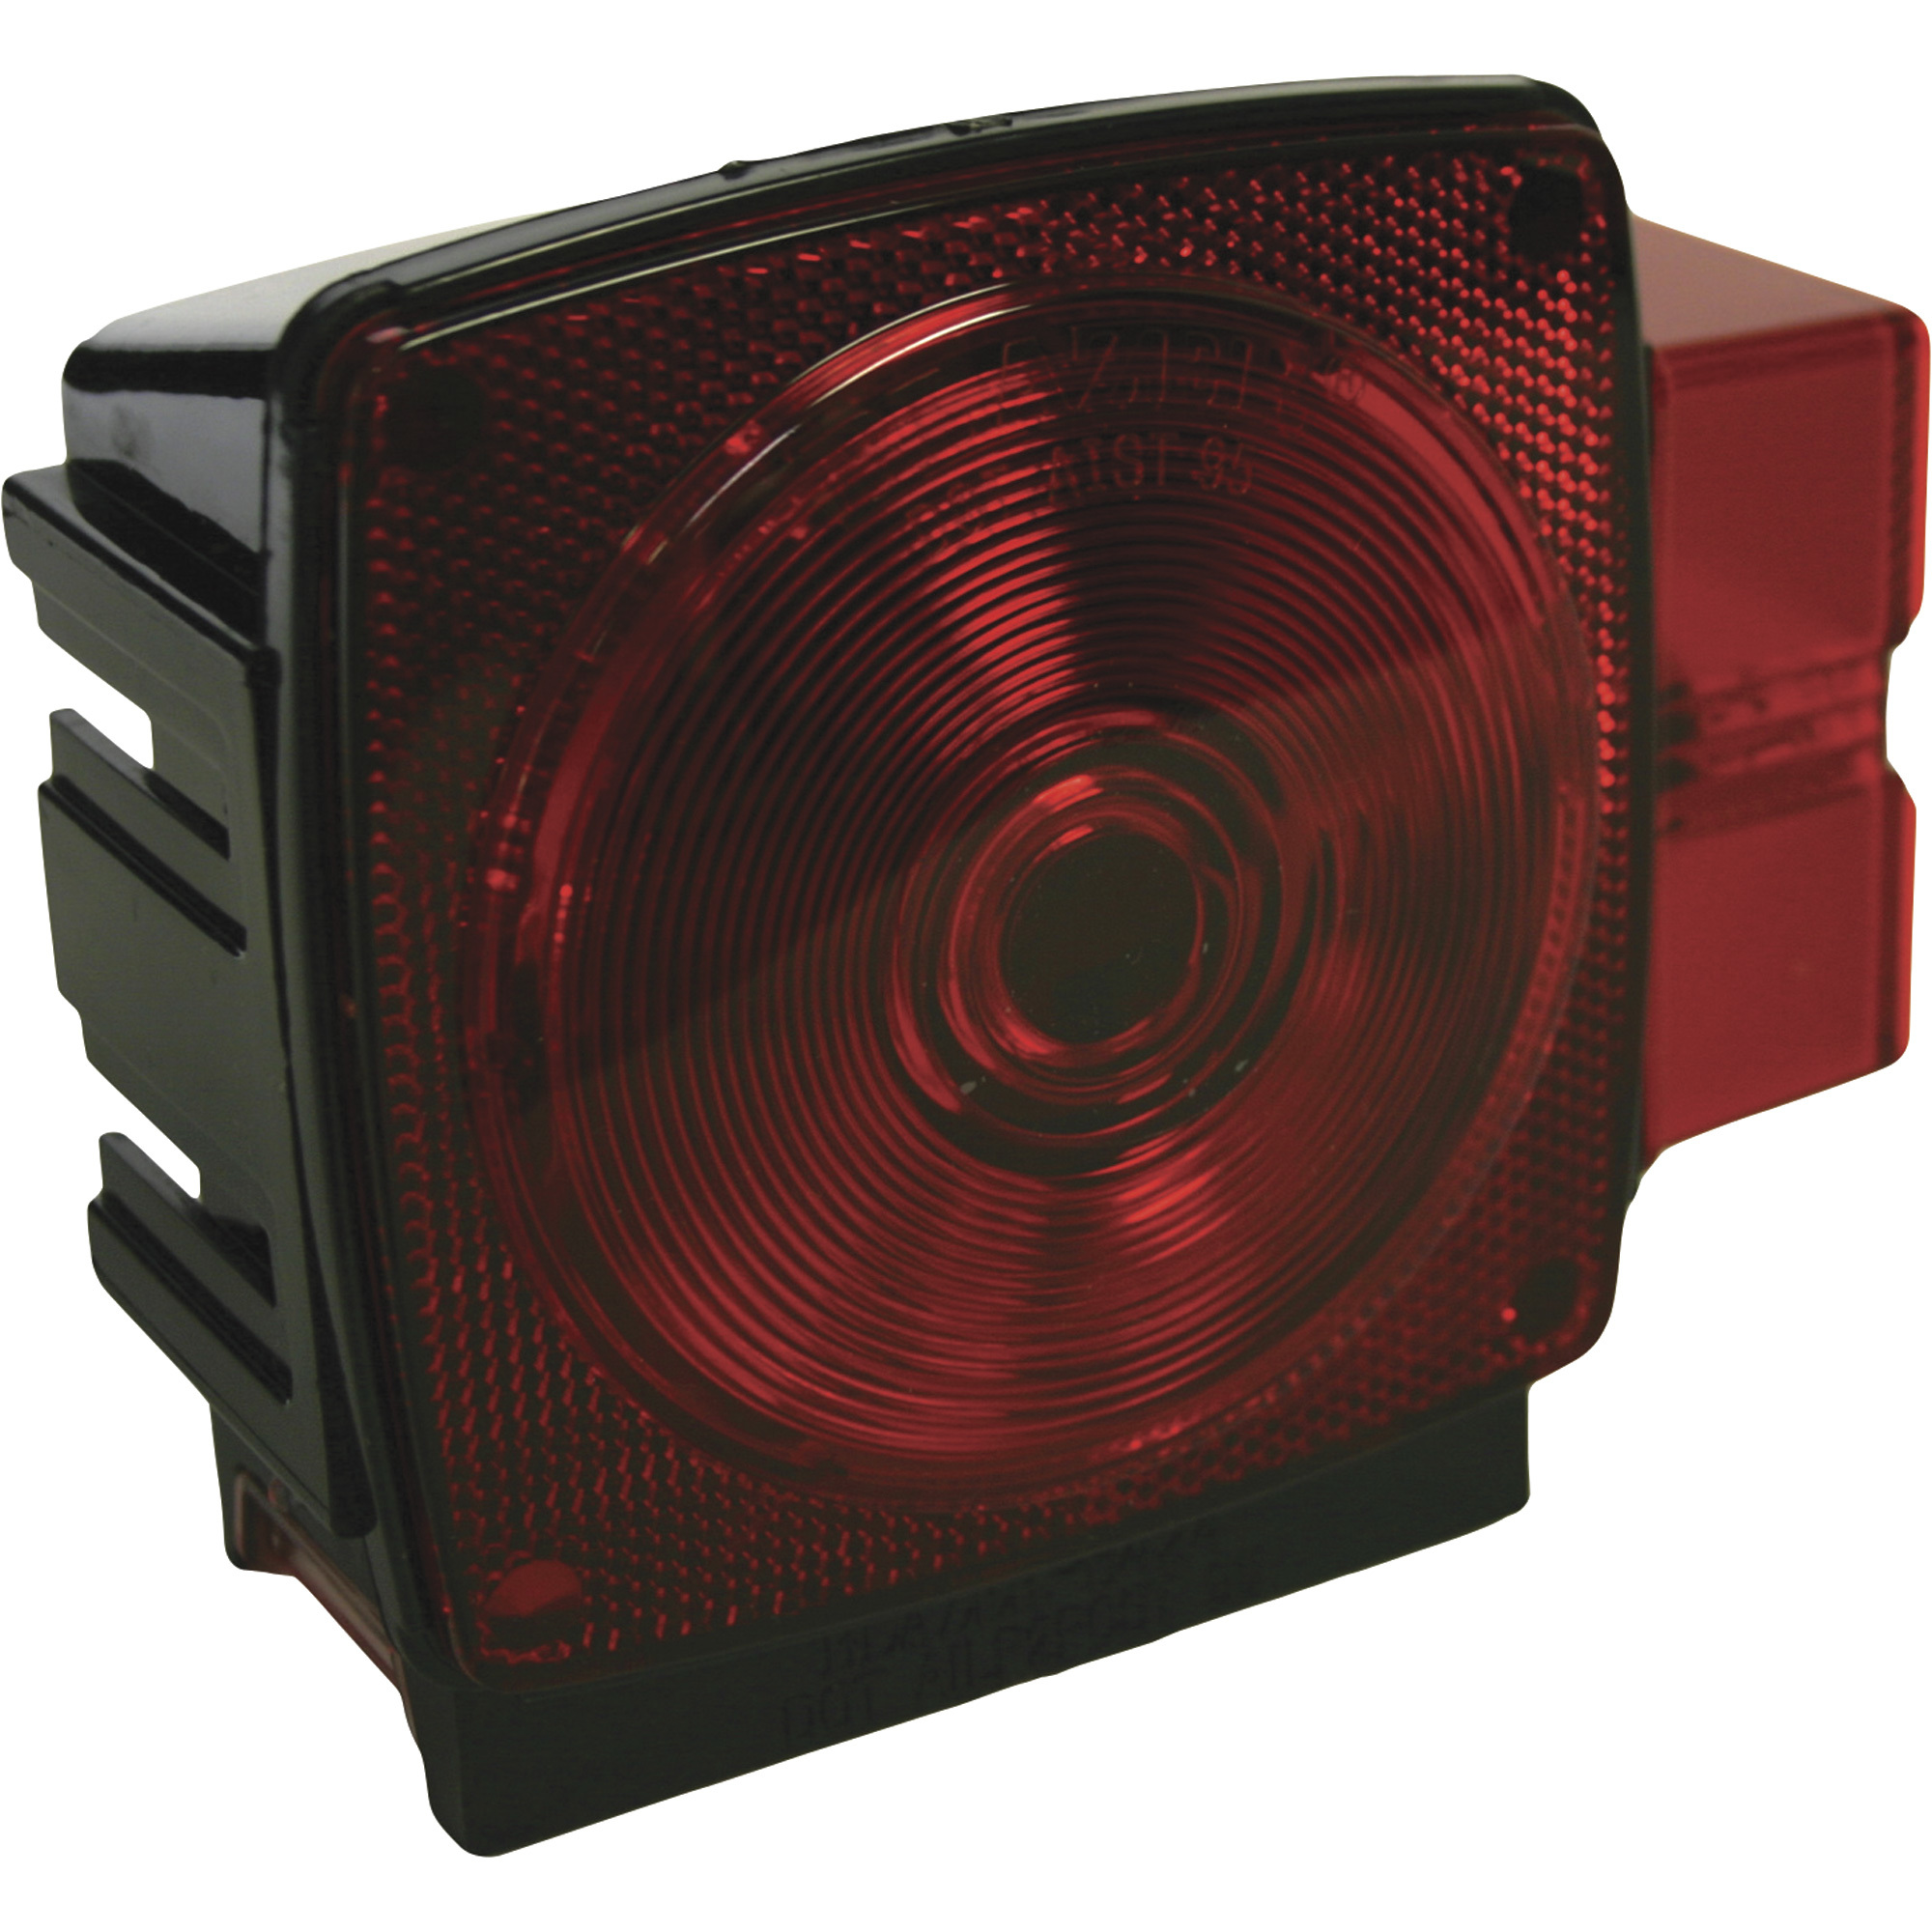 Hopkins Towing Solutions 7-Function Incandescent Stop, Turn, and Tail Trailer Light â 5 3/4Inch x 5 1/4Inch, Right Hand Side, Model B94